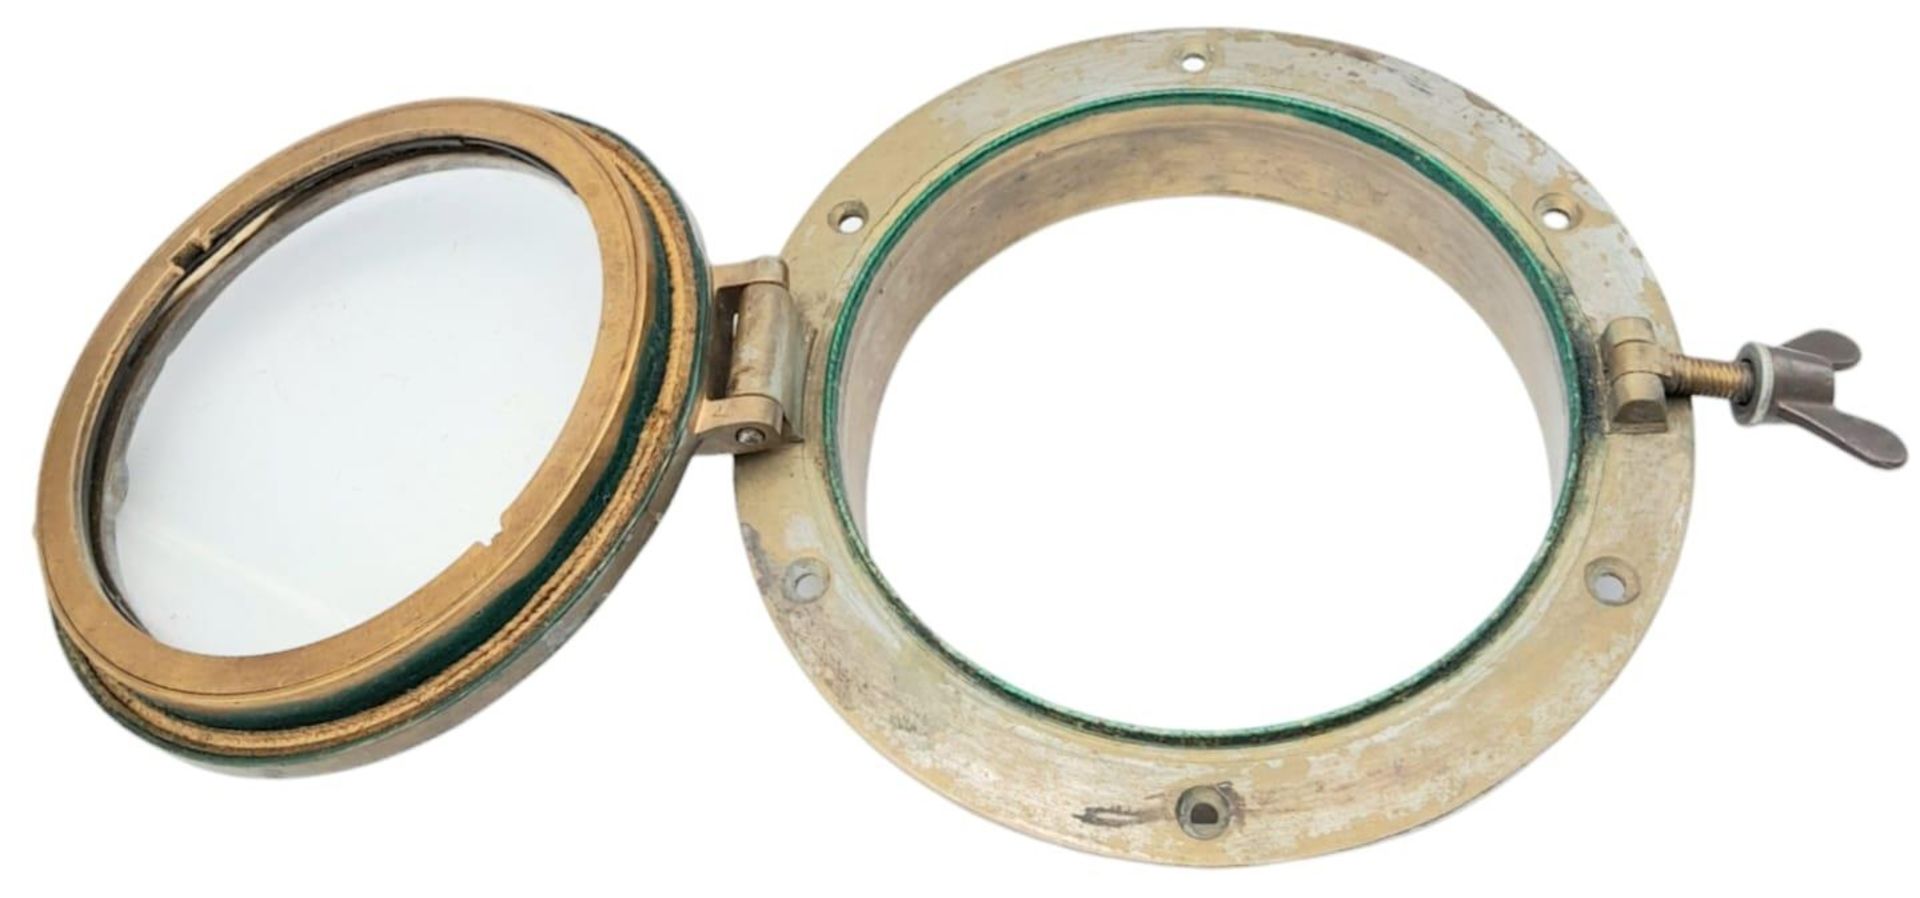 A WW2 German Kriegsmarine “Schnell Boot” Fast Boat Porthole. Commonly known as “E-Boats” by the - Bild 2 aus 6